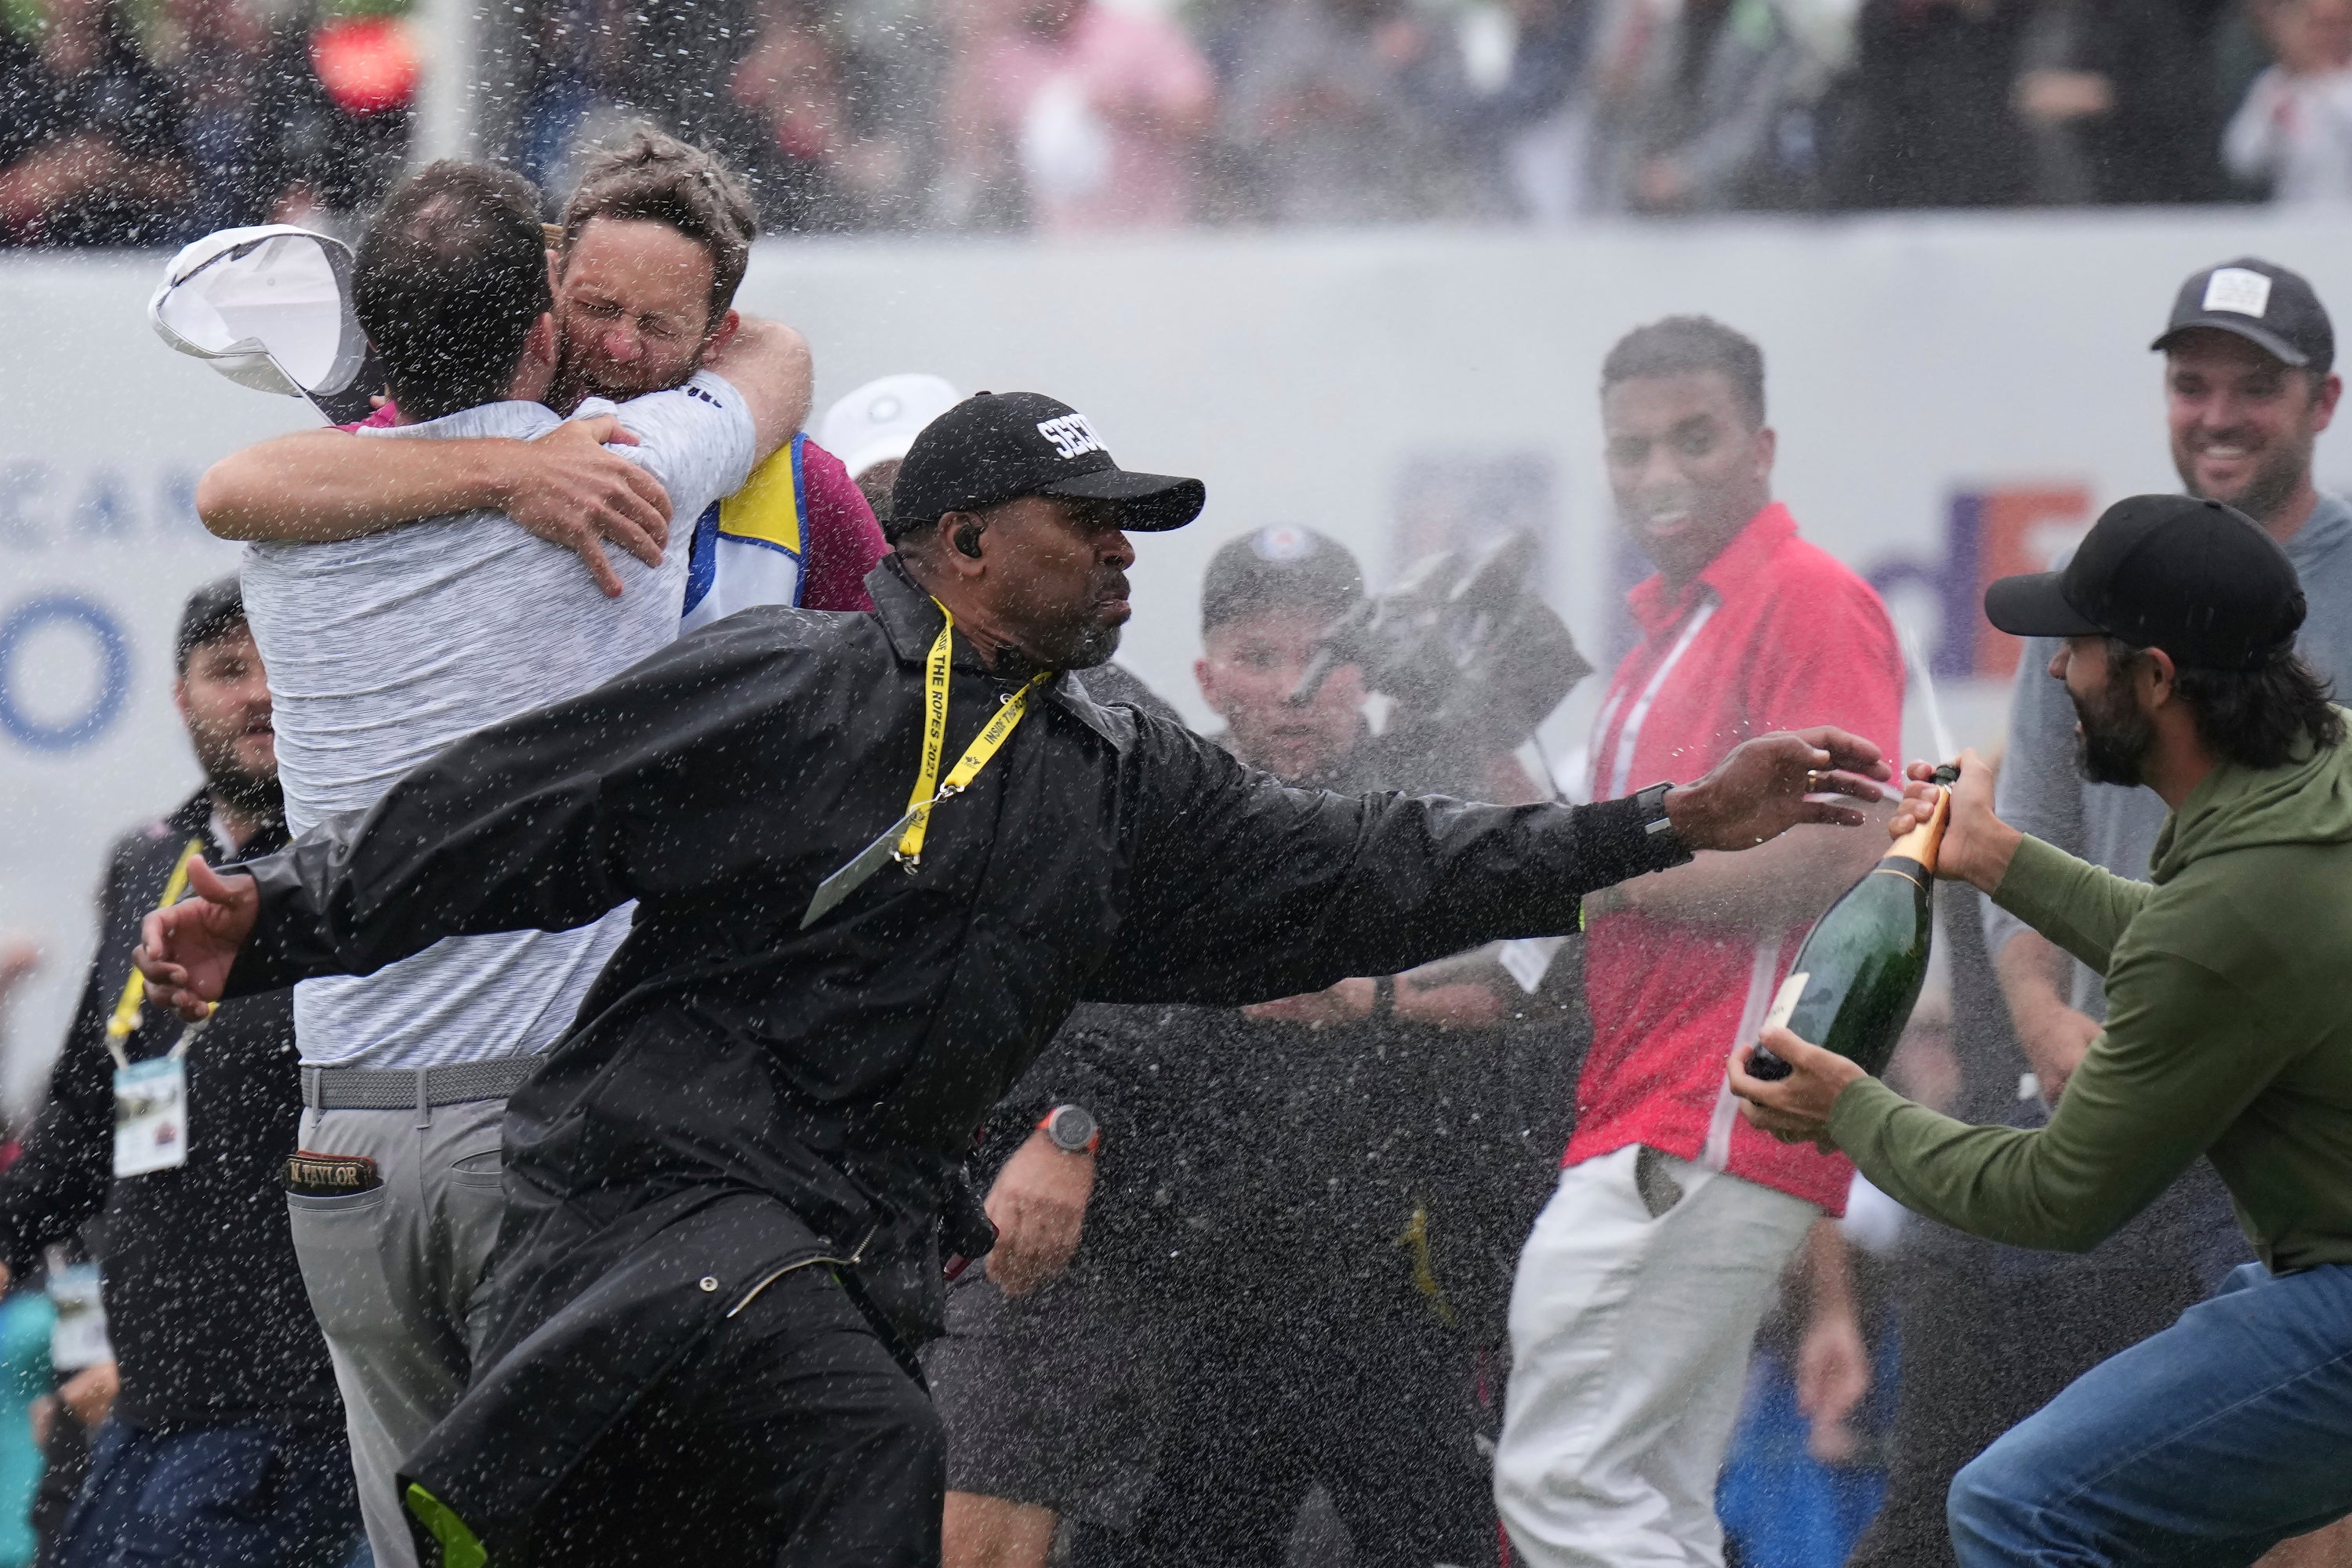 A security moves in to tackle champagne-wielding Adam Hadwin